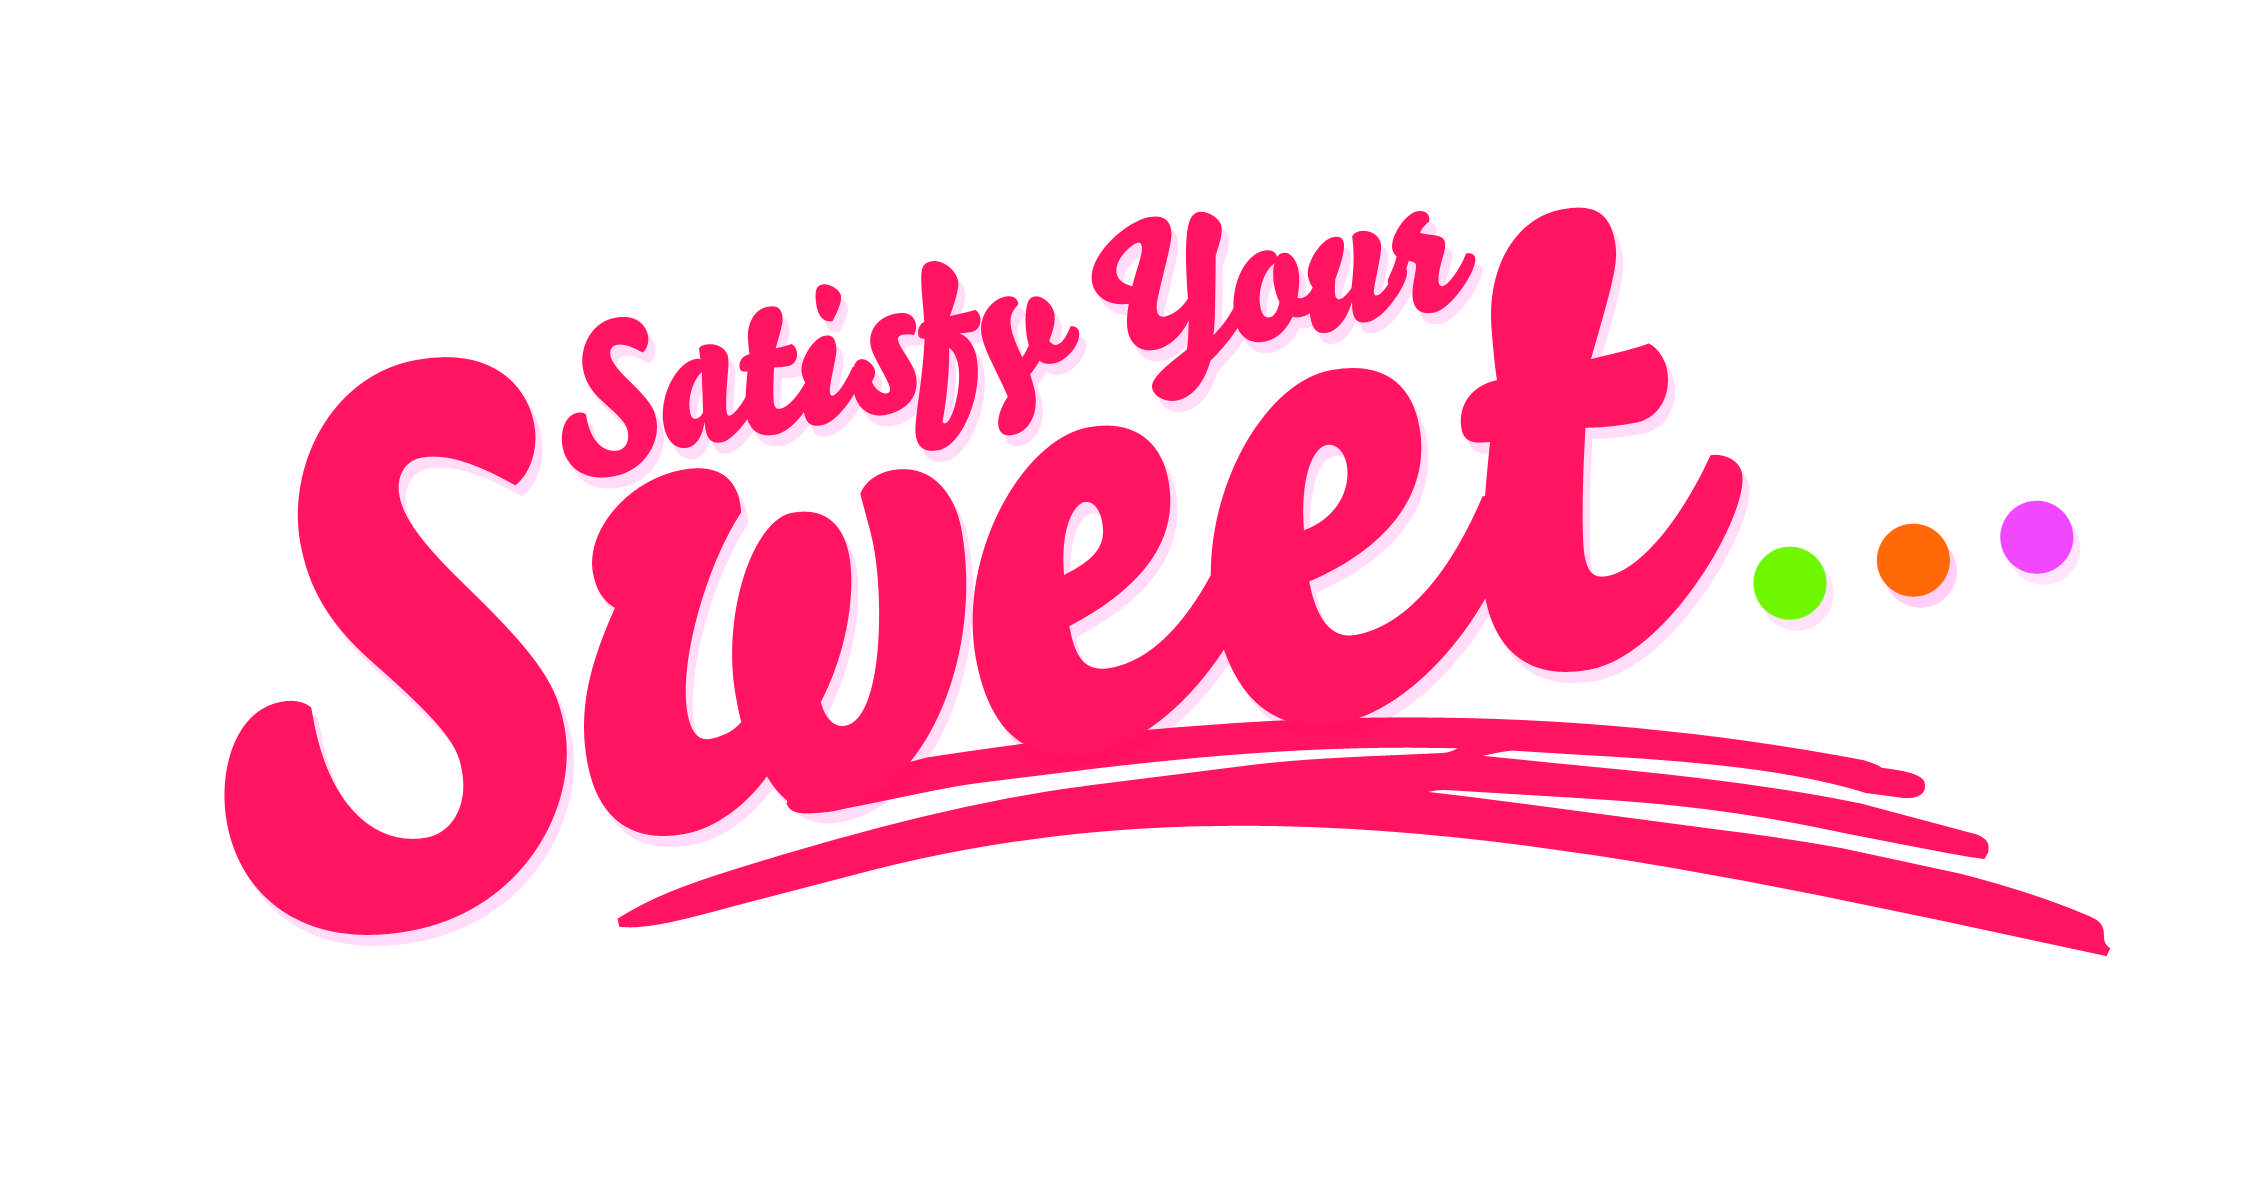 Sweet Logo - Satisfy Your Sweet: A New Program from St. James Winery. St. James